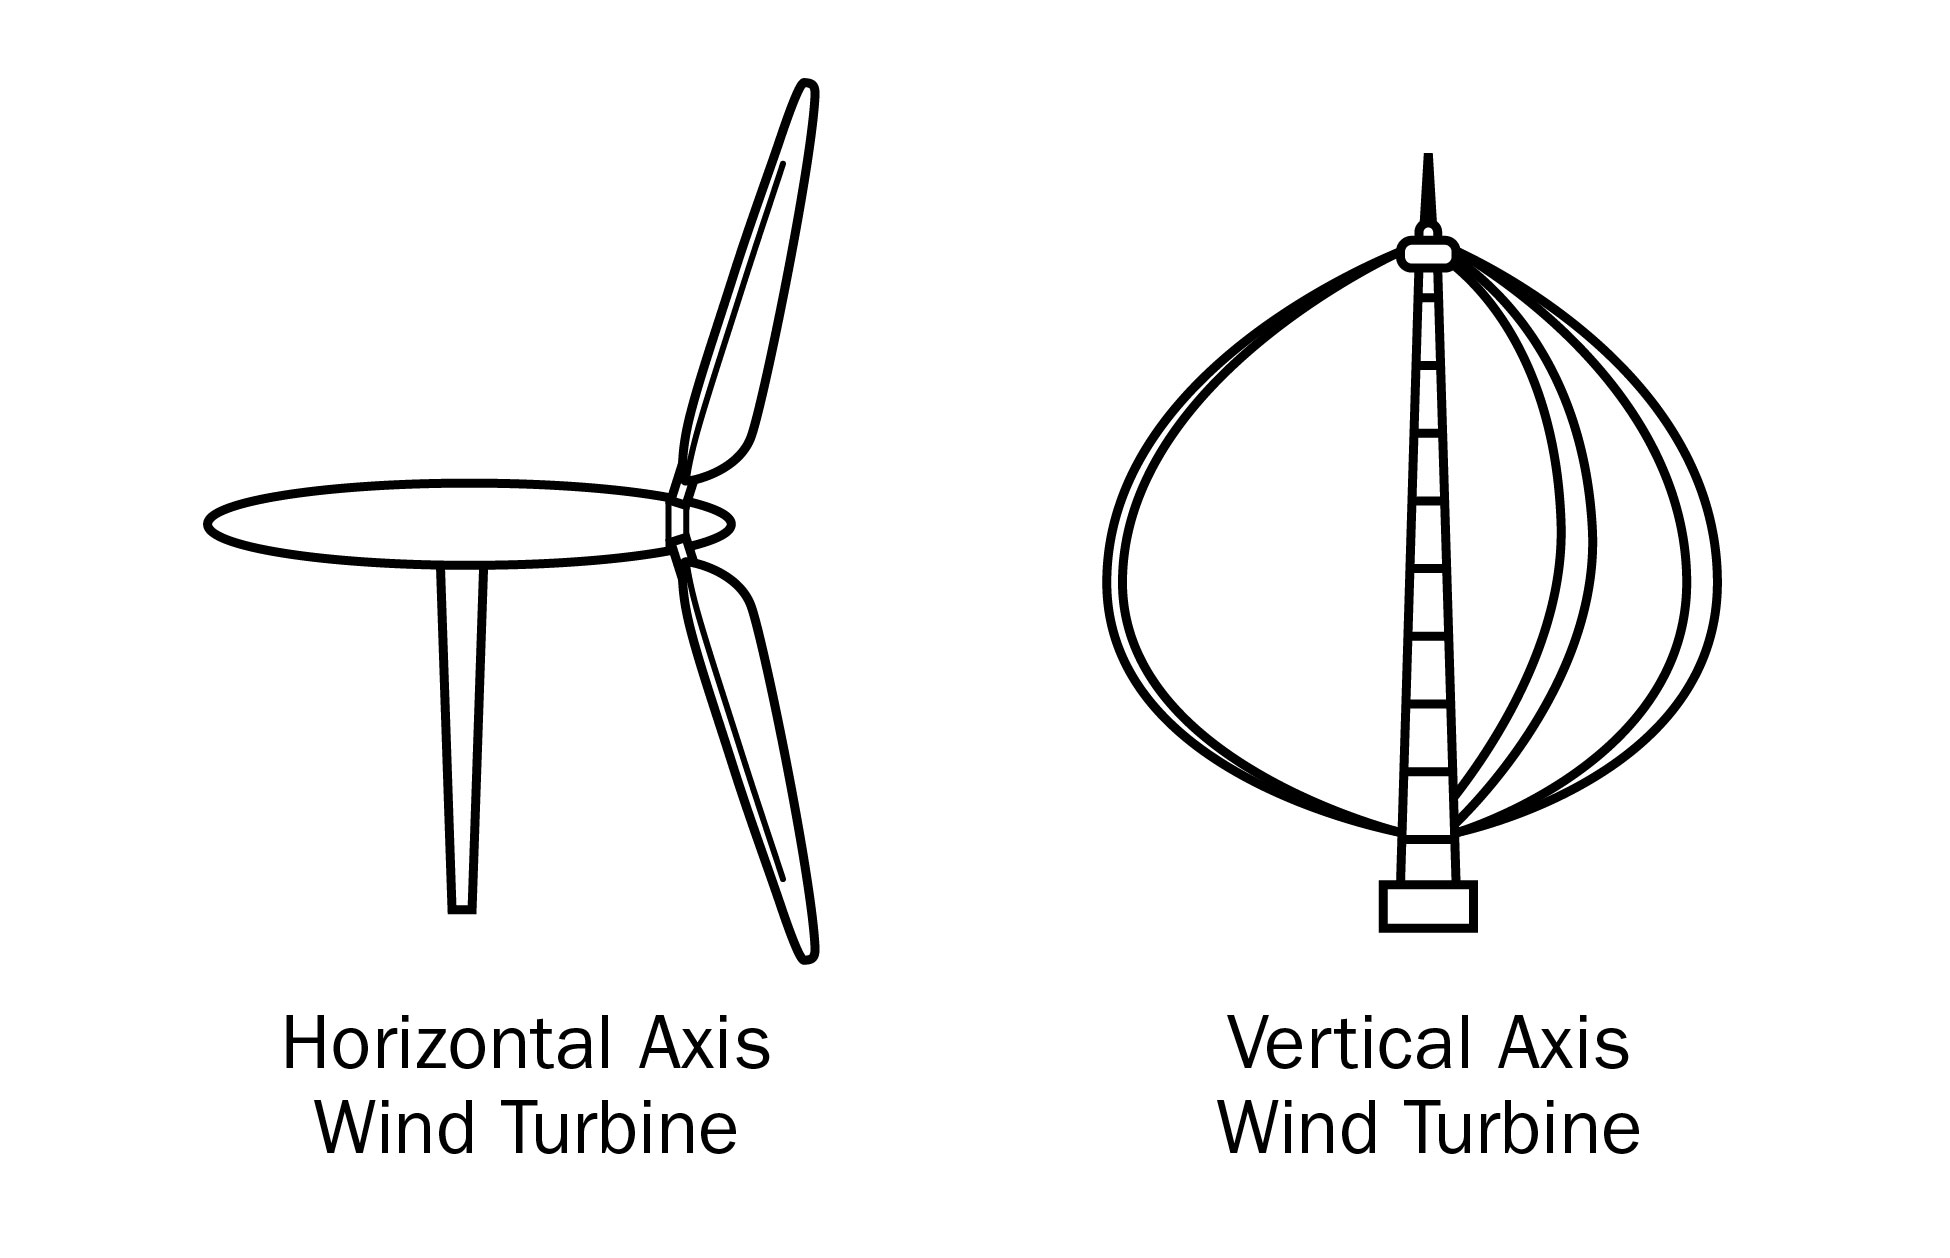 Two basic wind turbine types: horizontal and vertical axis